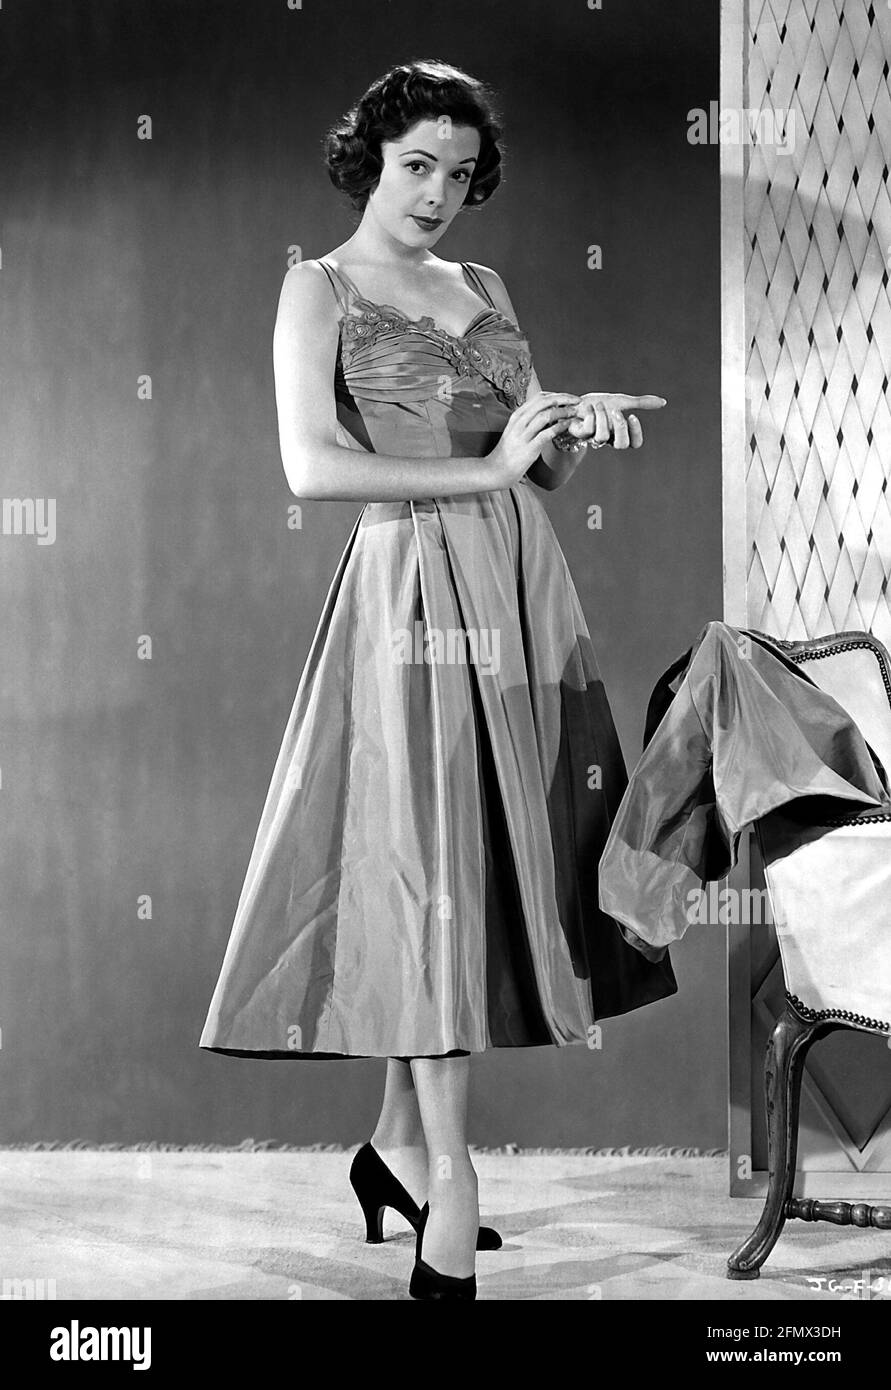 1950s Evening Dress High Resolution Stock Photography and Images - Alamy